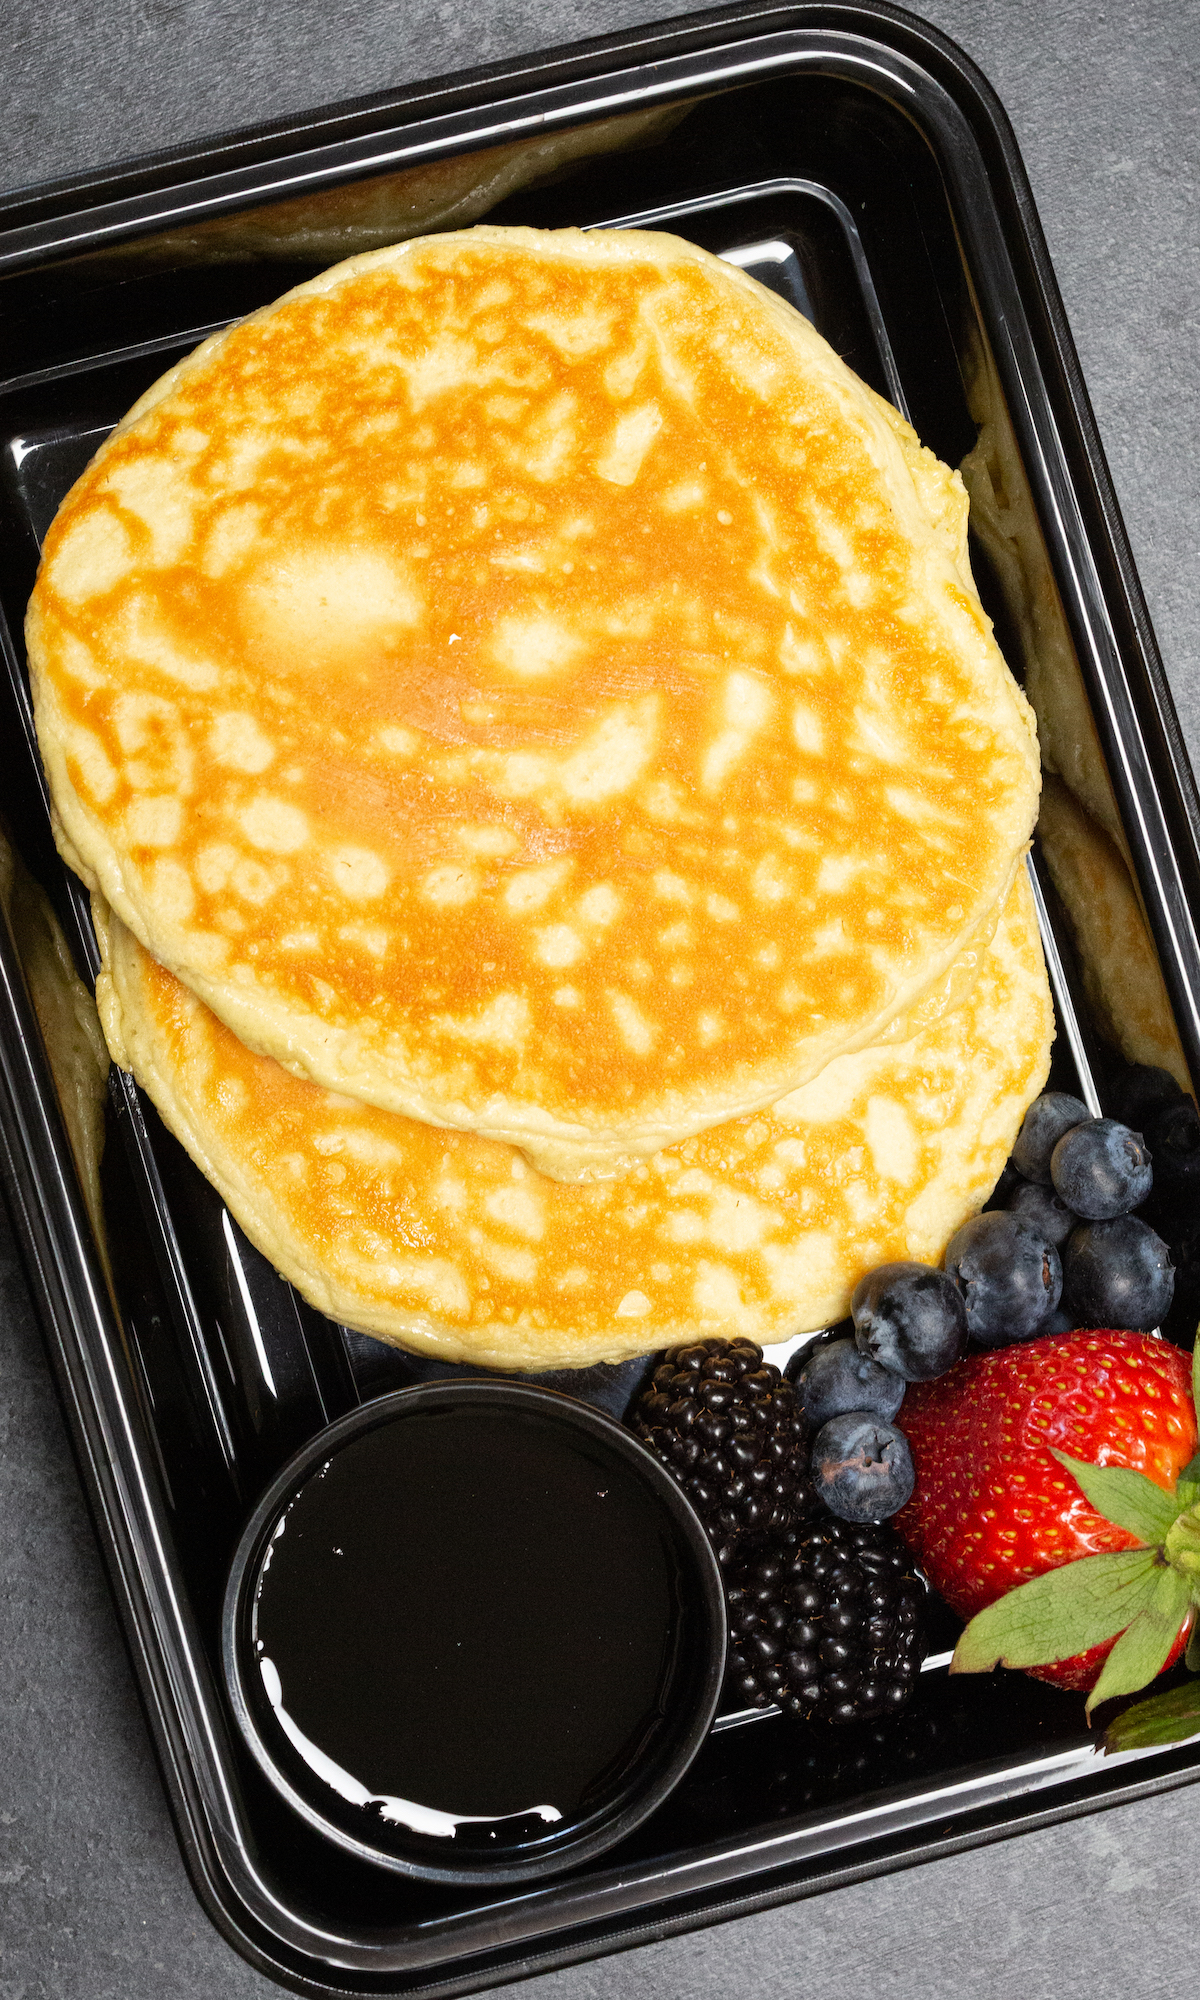 Overhead view of a single disposable meal prep container filled with two protein pancakes, syrup, blueberries, and strawberries.